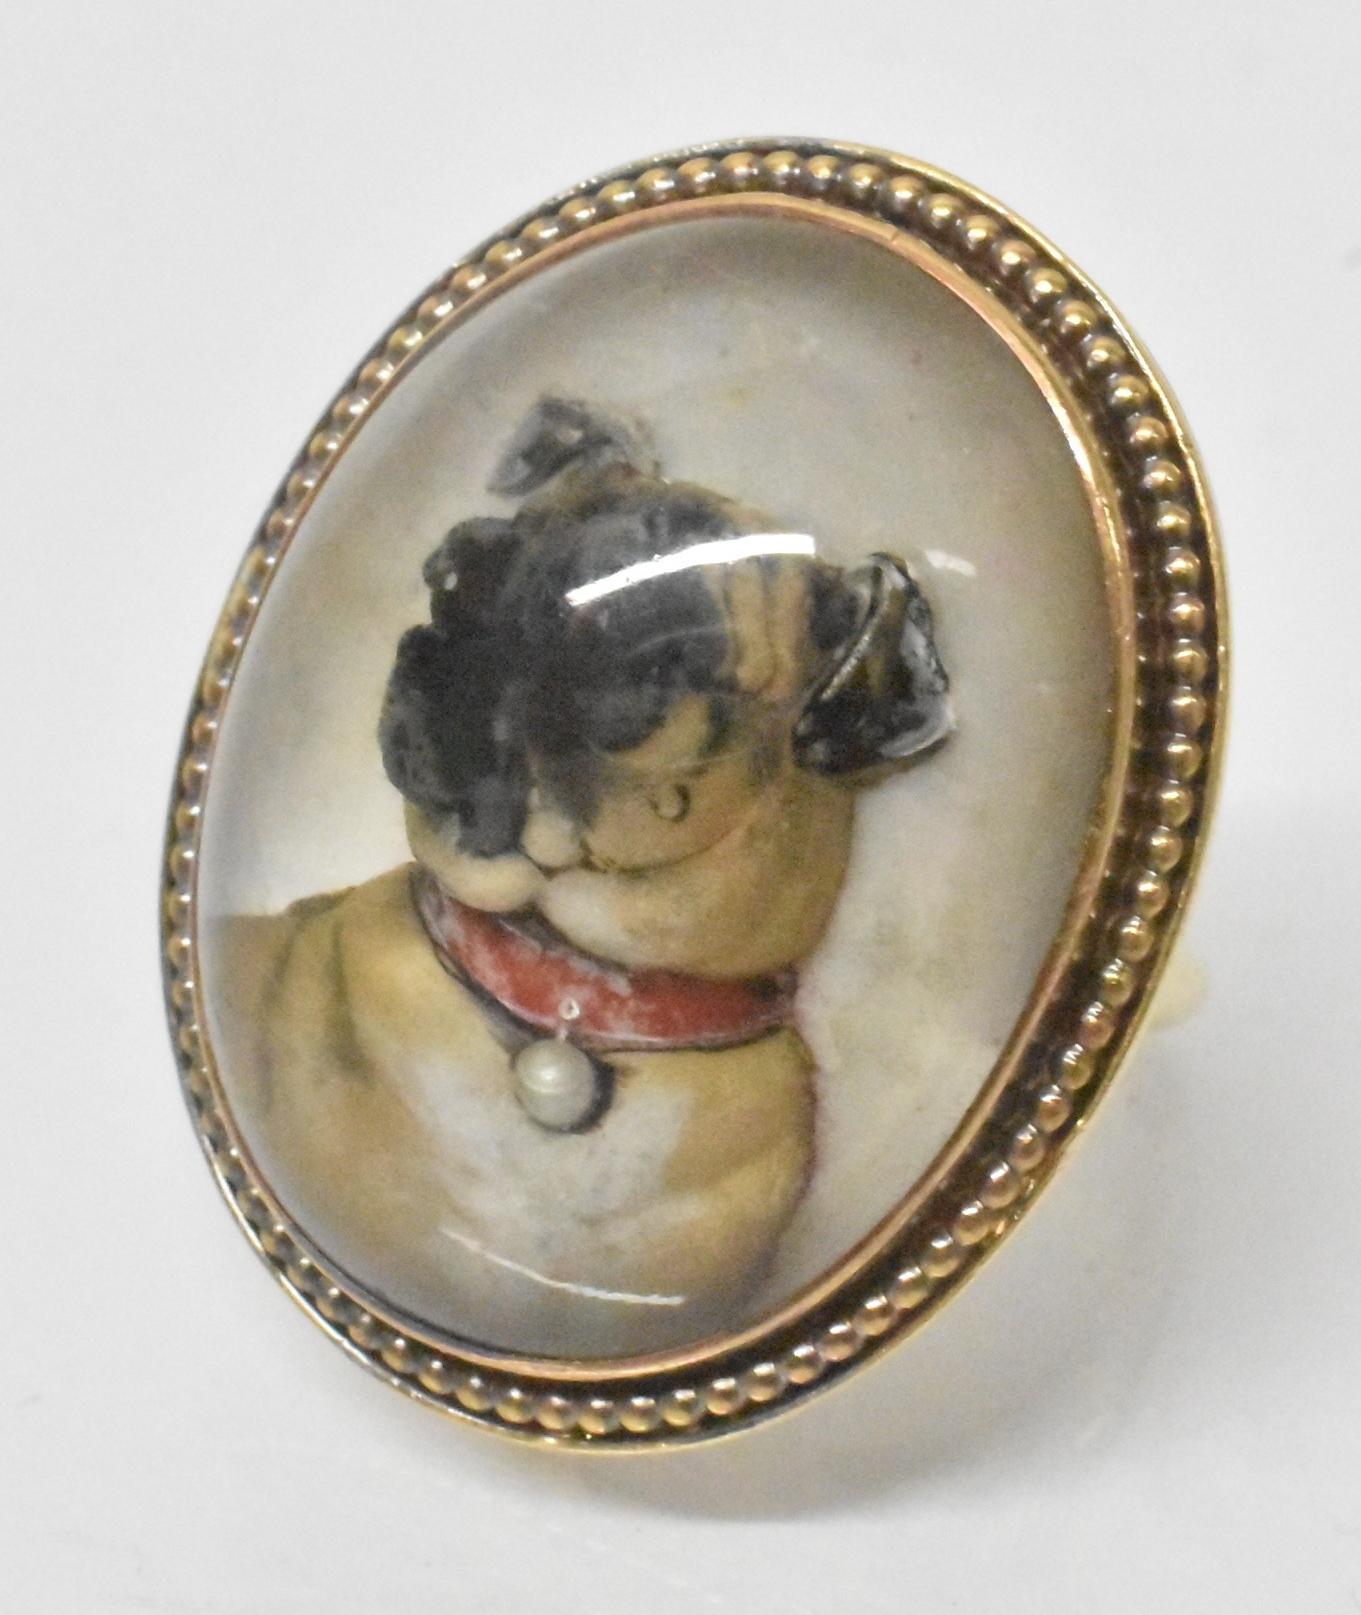 Victorian Essex Crystal Intaglio reverse painted pug ring, 10K. These rings were a novelty during the Victorian Period. Essex crystal cabochons were carved on the flat side with an image and then painted to give a 3-D impression when viewed through